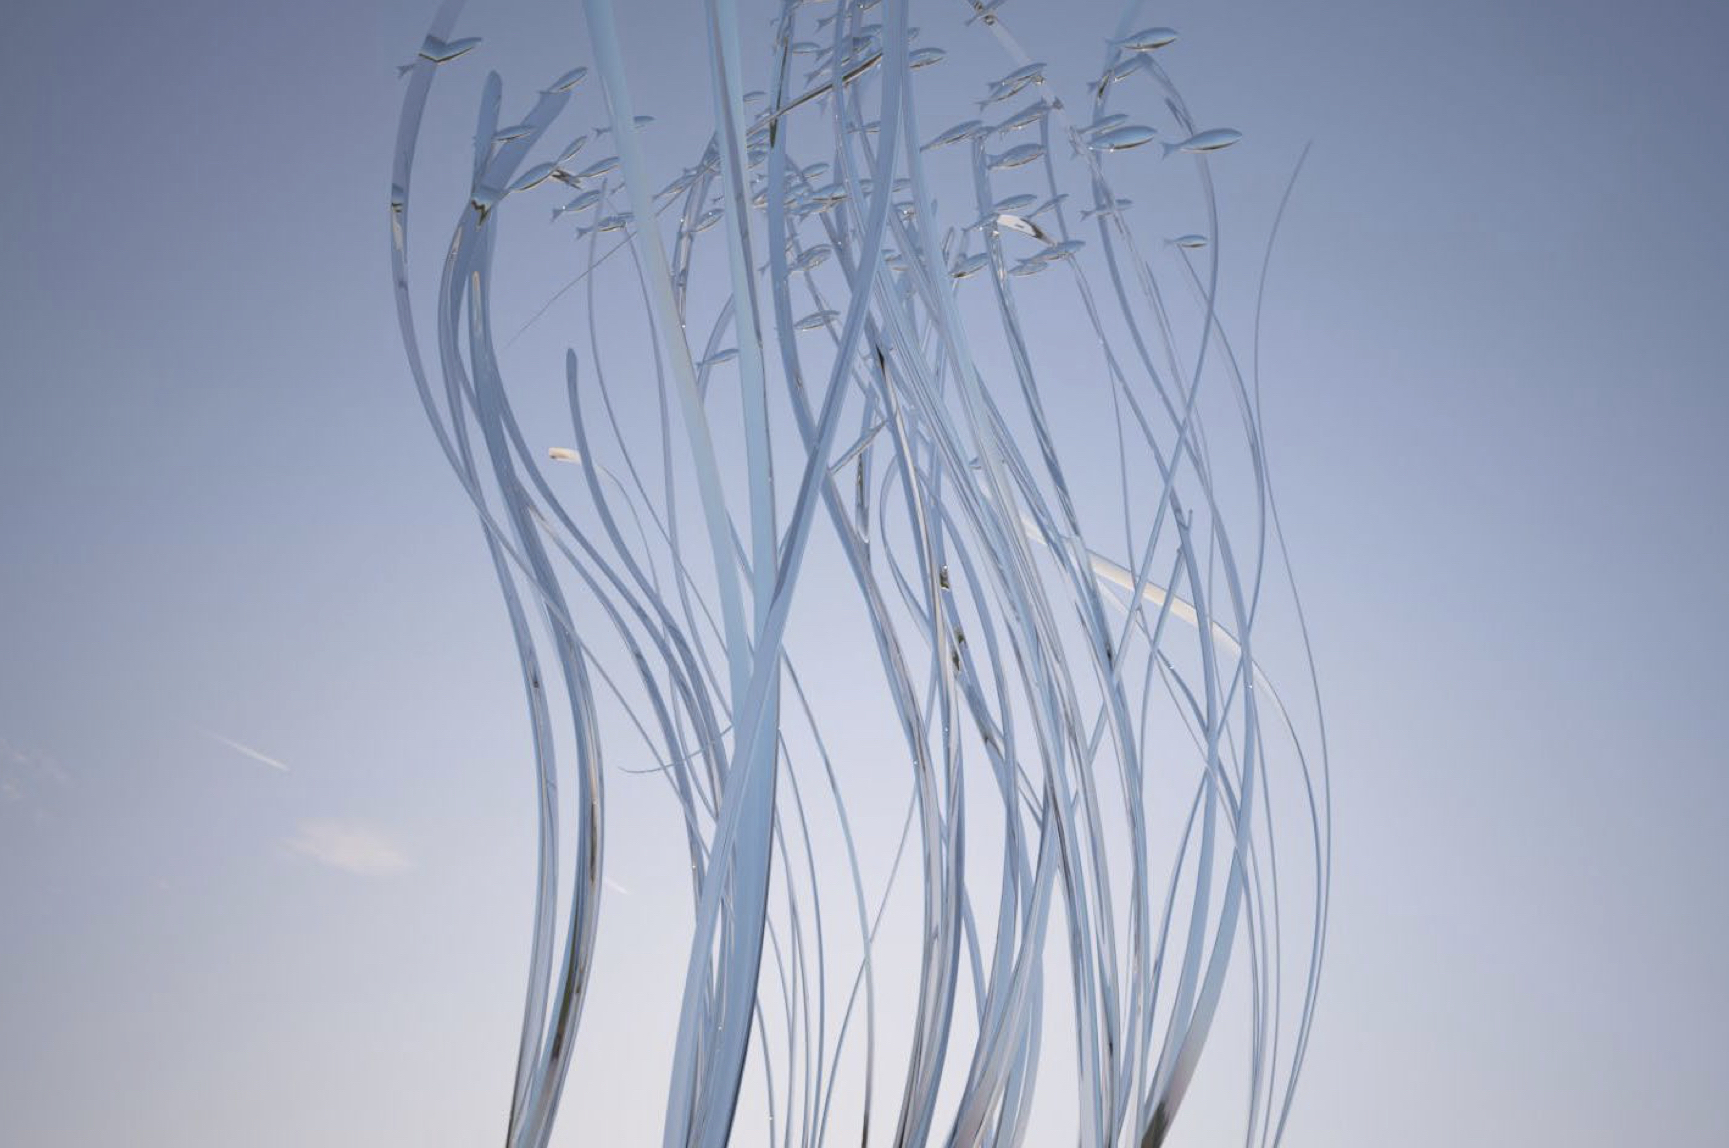 Seagrass, by Spanish sculptor Casto Solano, will be installed in the roundabout at U.S. 41 and 10th Street. (File rendering)